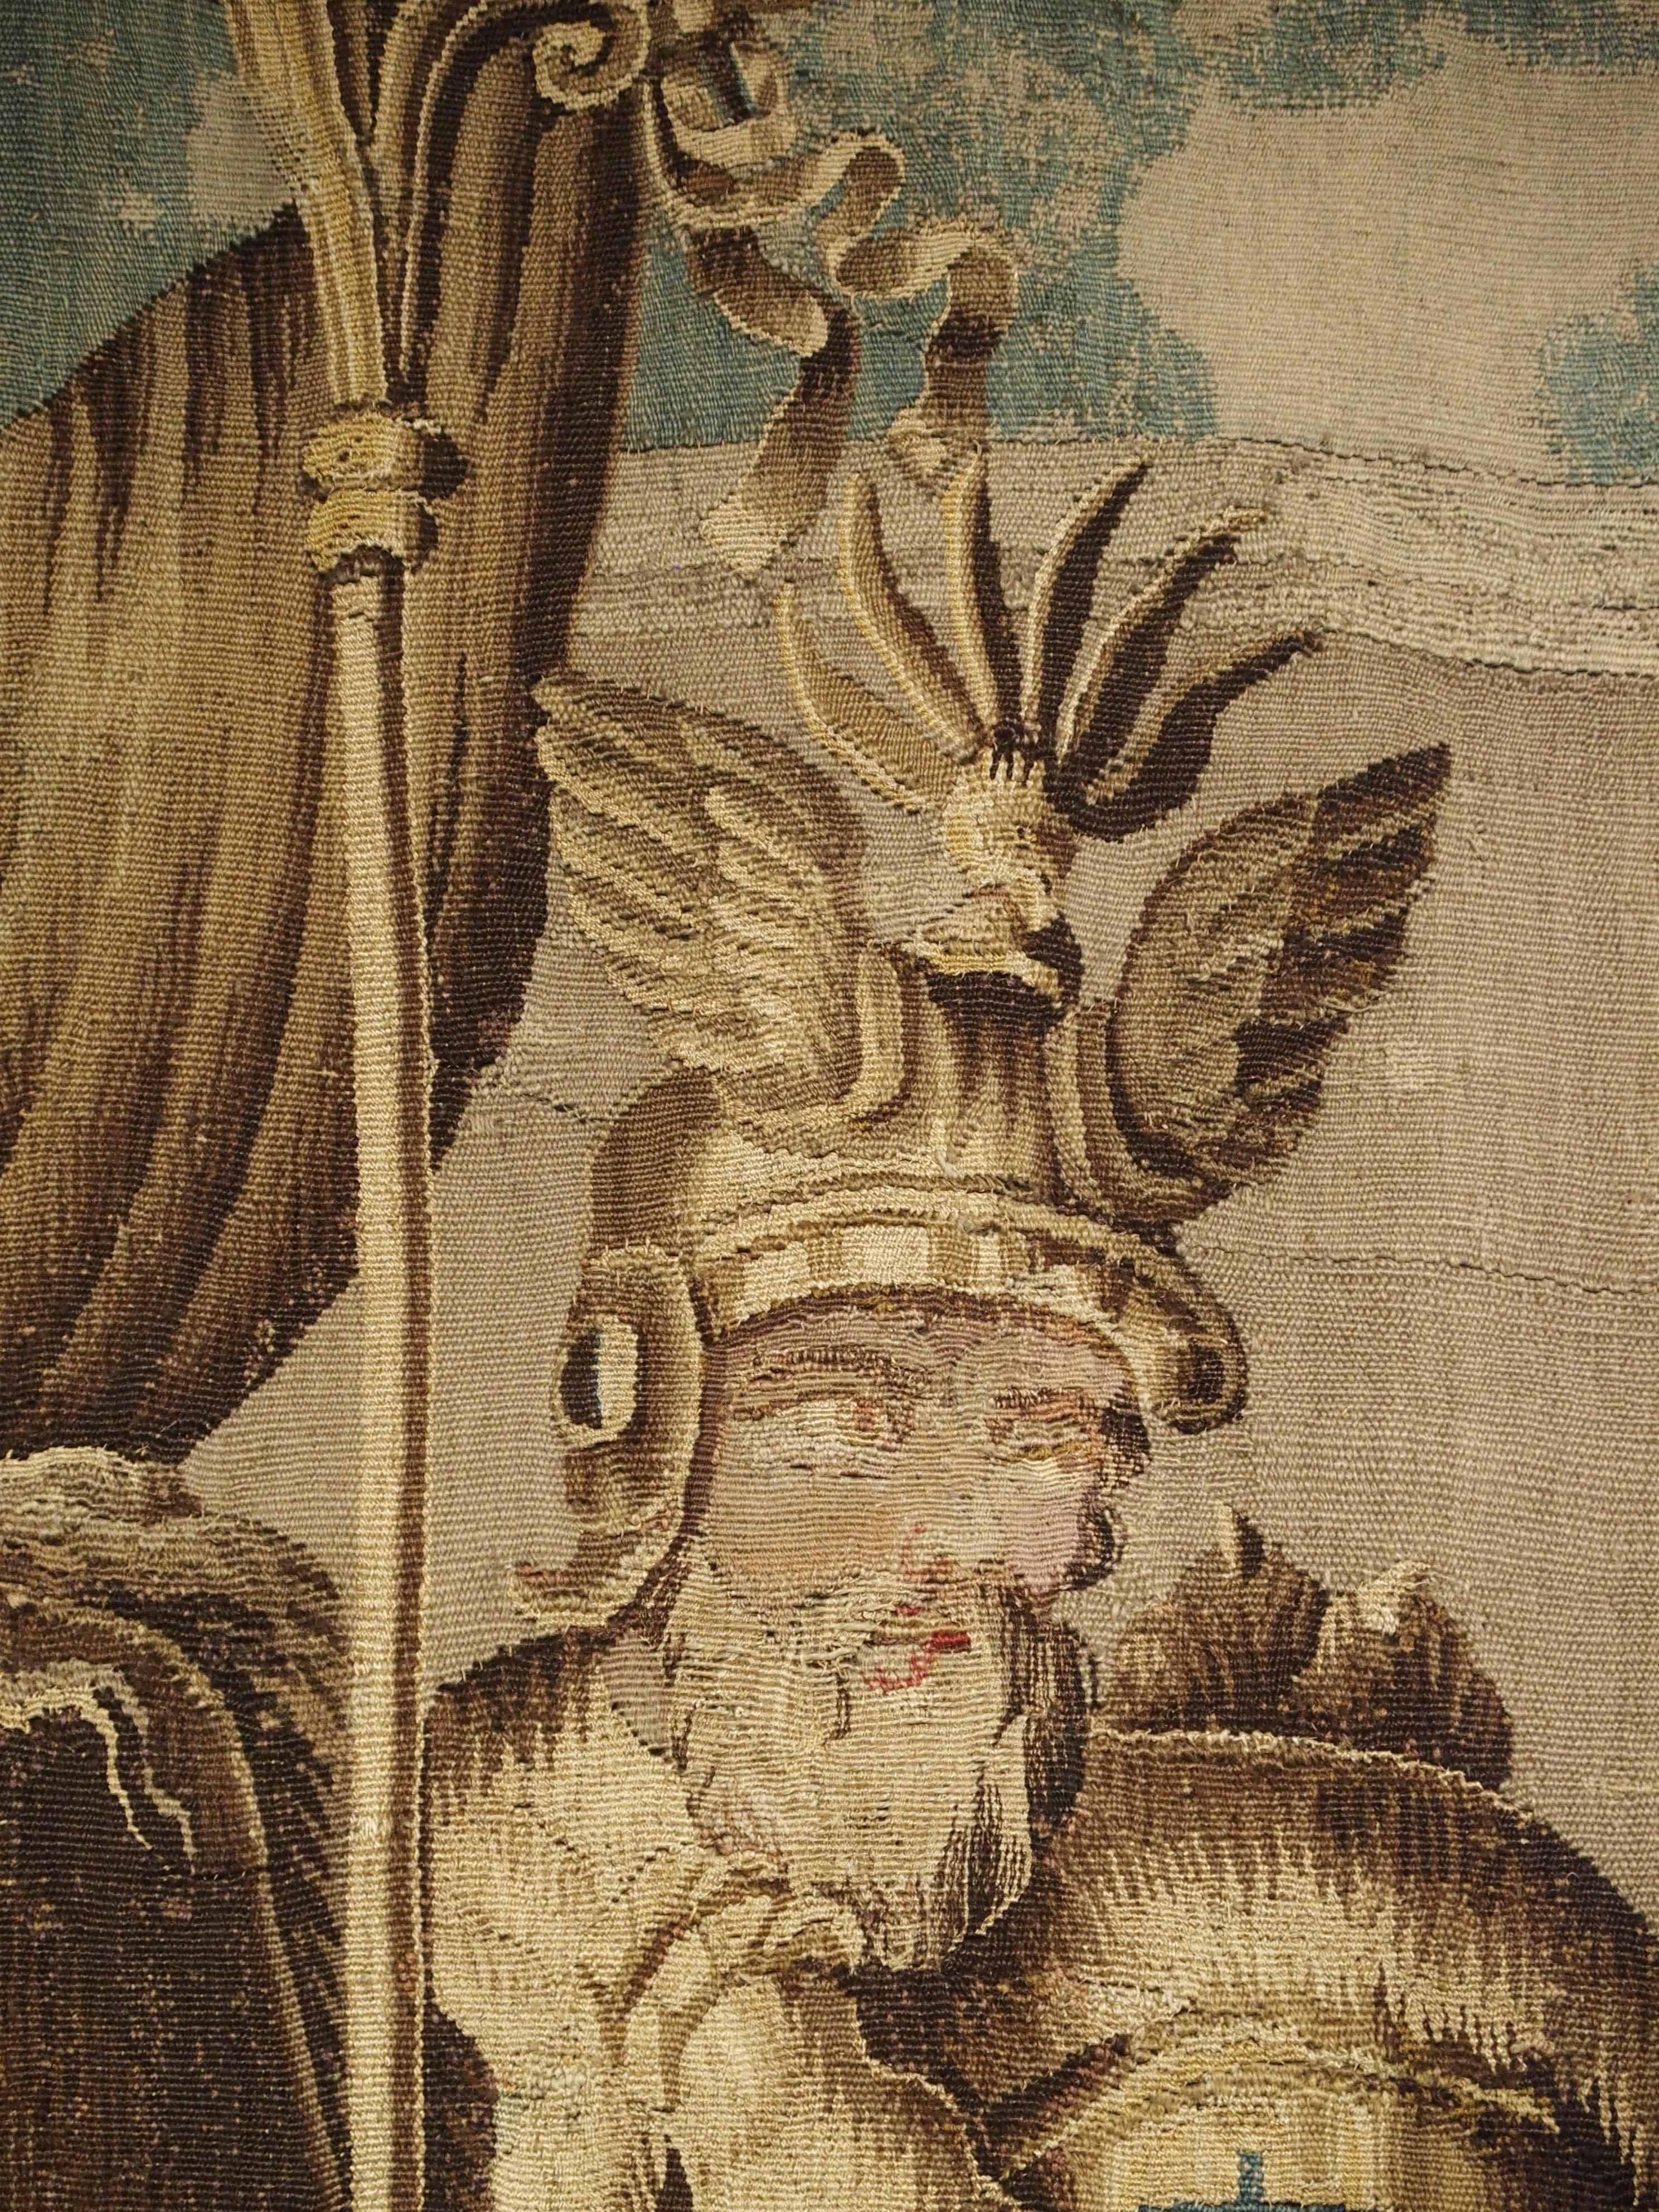 Silk and Wool Aubusson Tapestry, the Entry of Alexander into Babylon, circa 1710 7